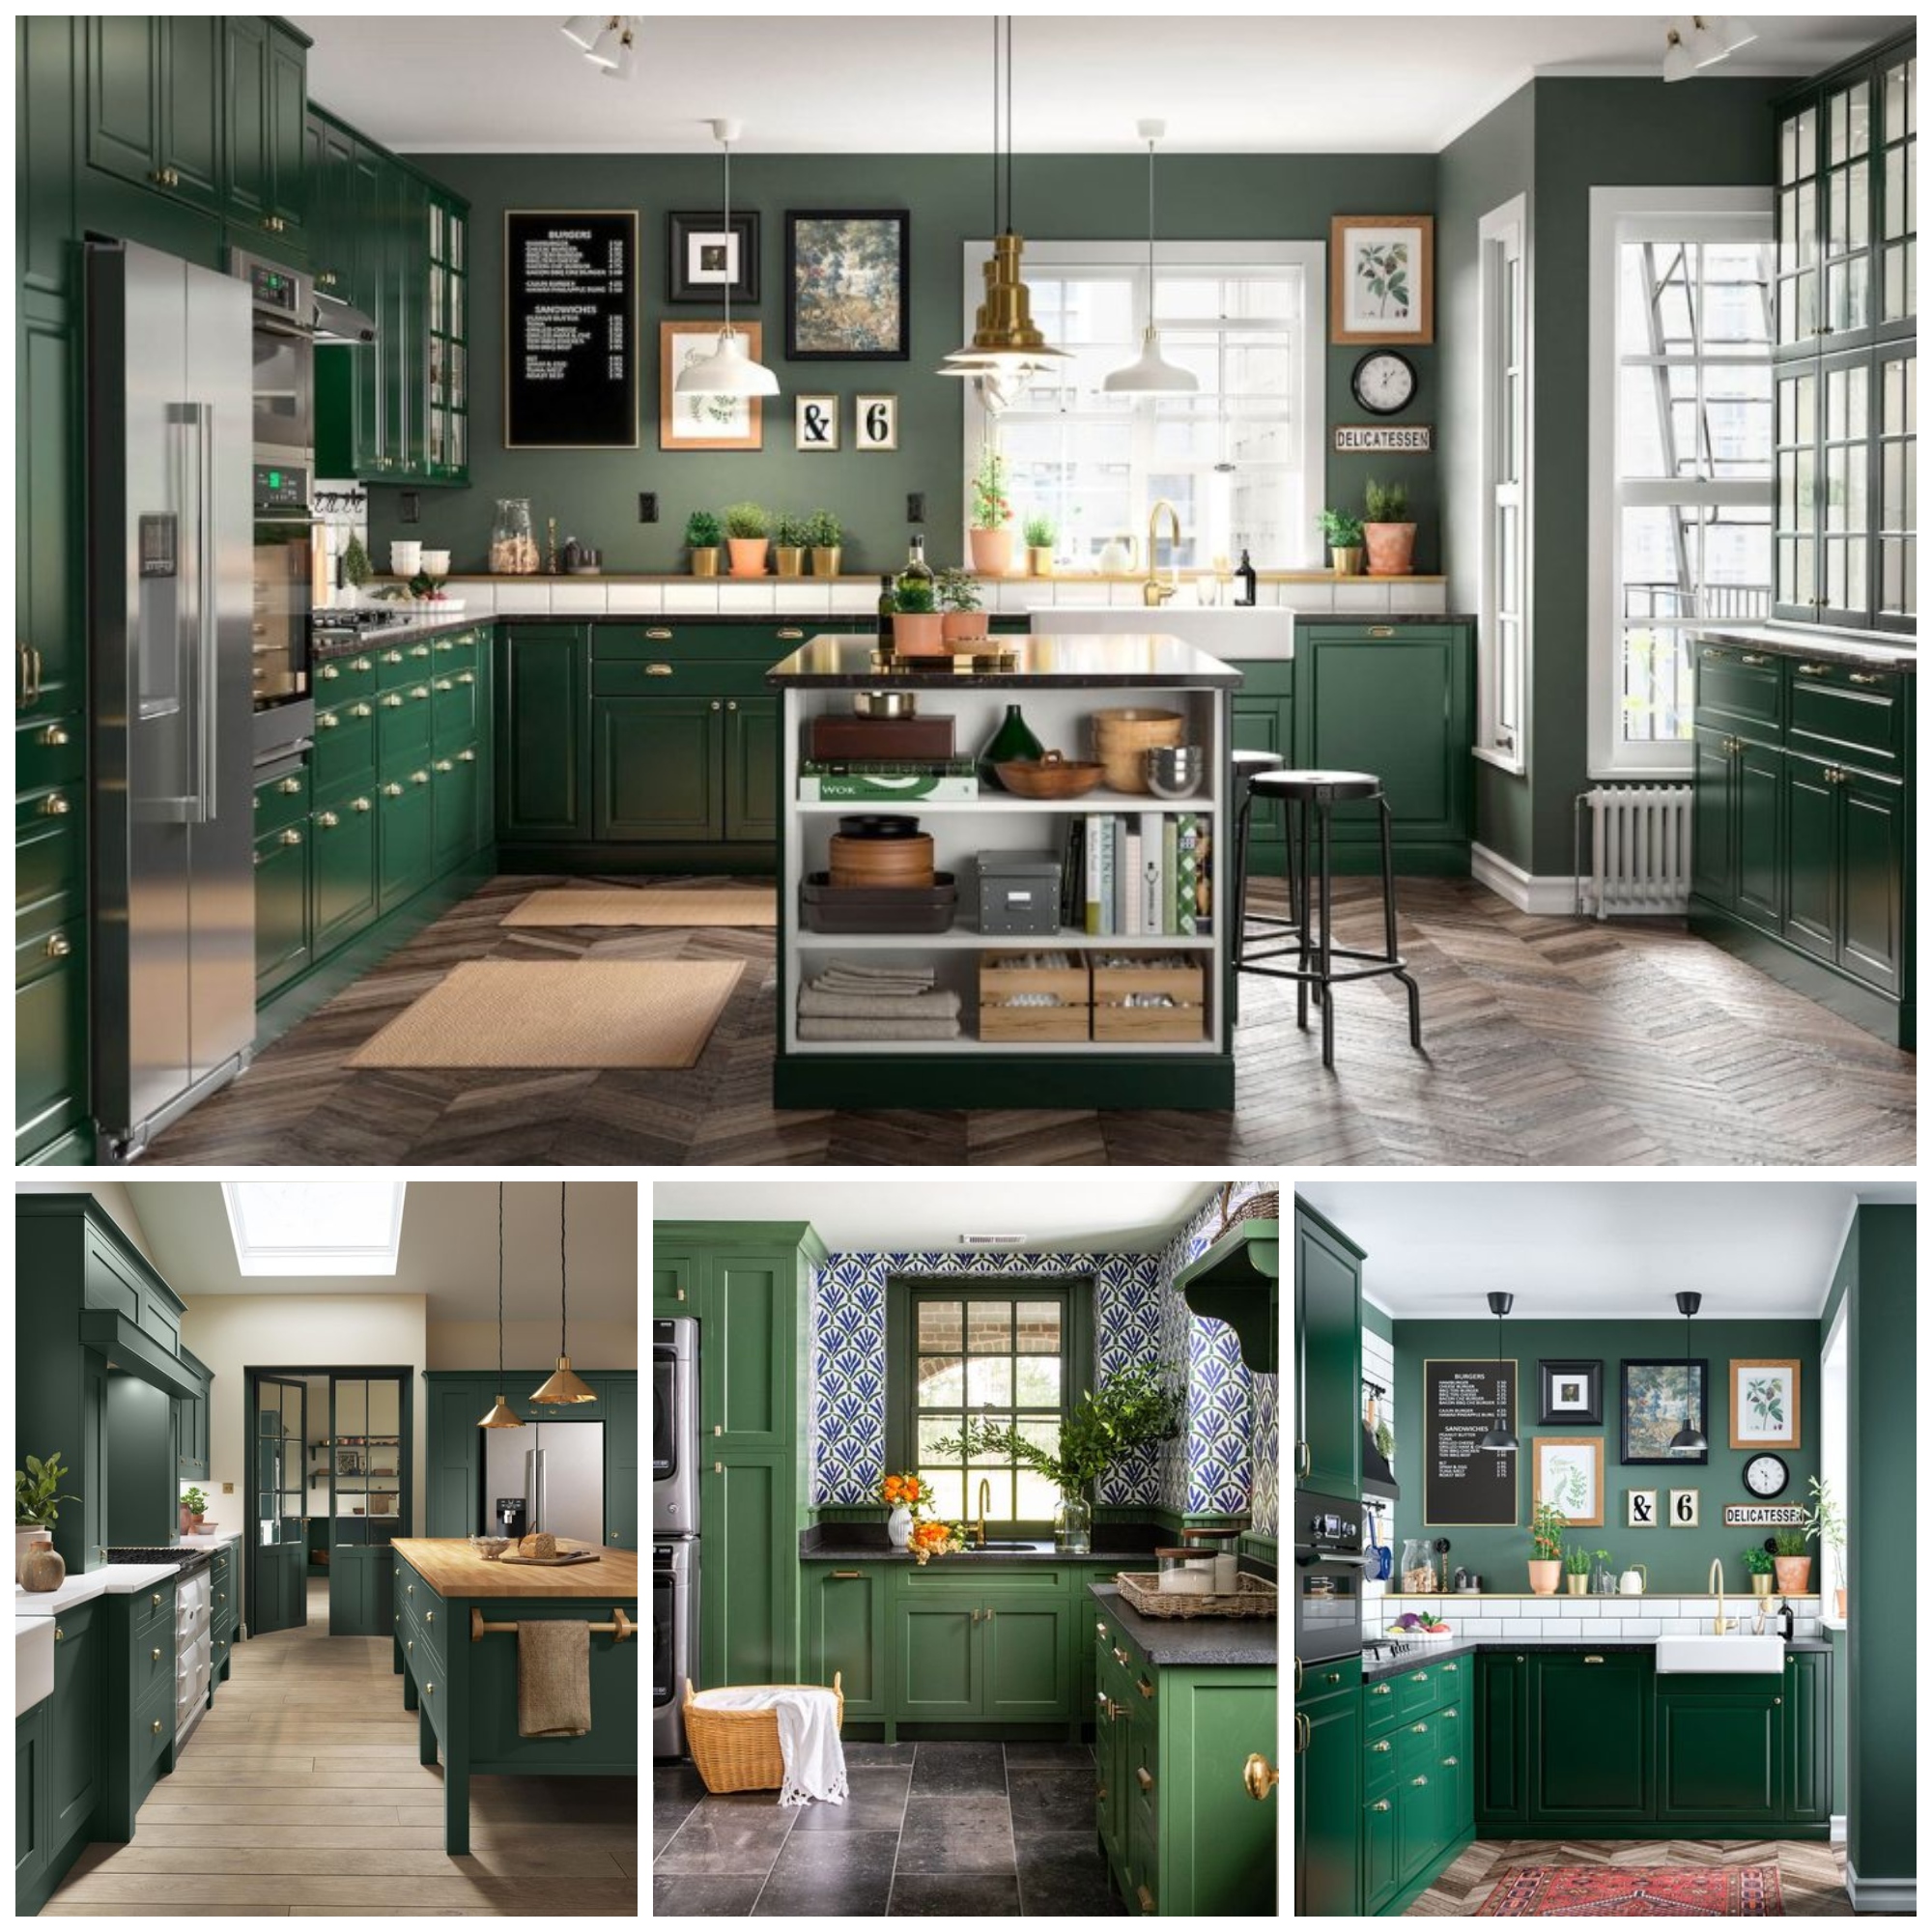 Green Kitchens Are Having a Moment